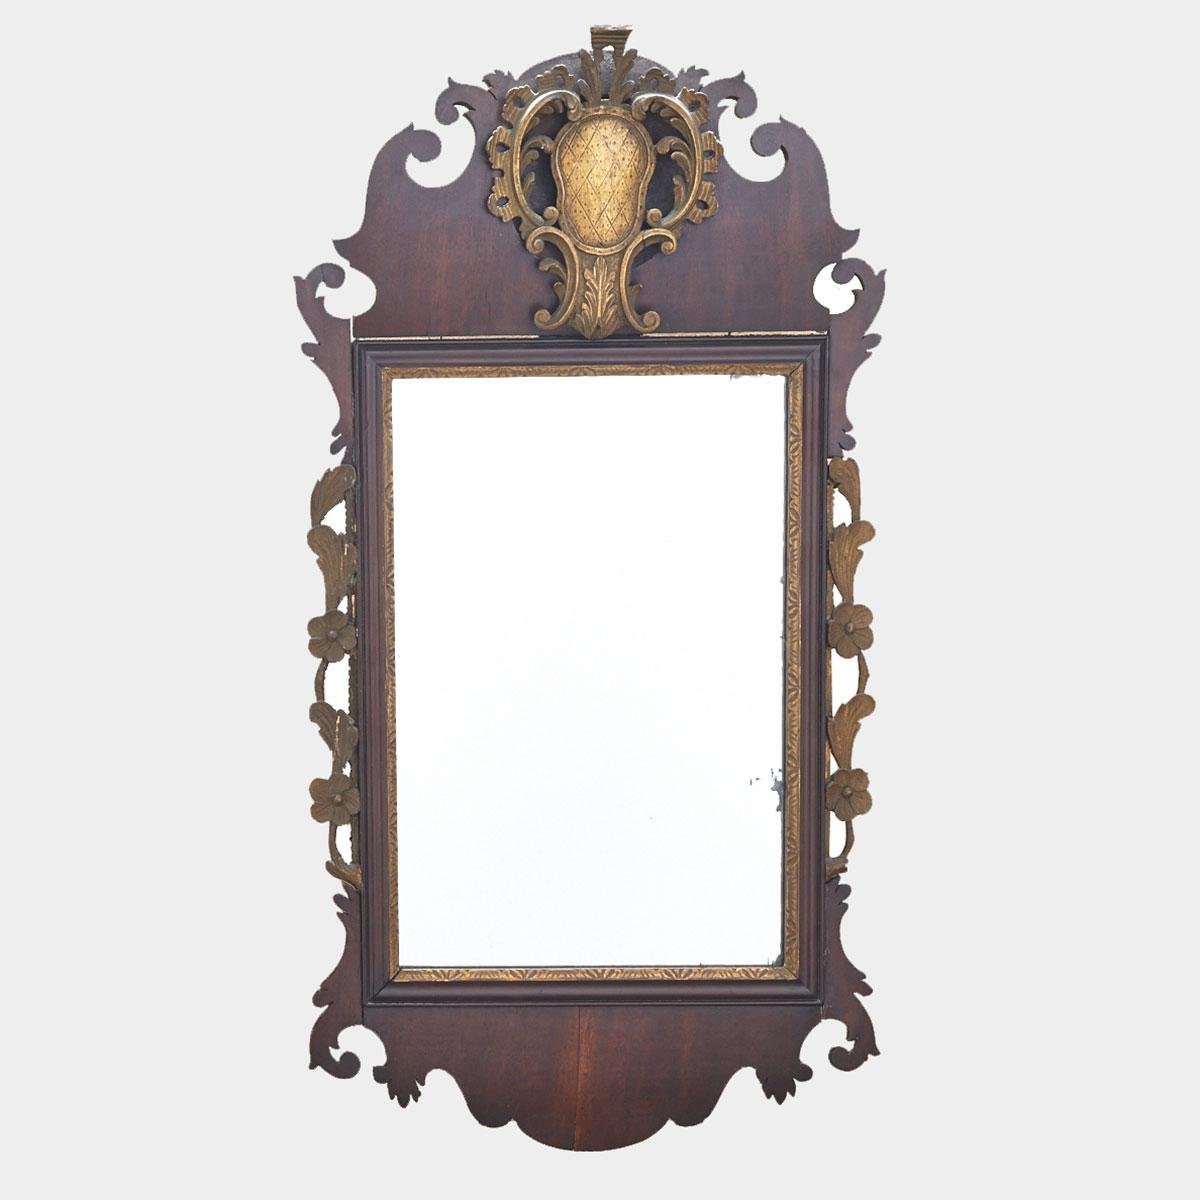 Chippendale Style Parcel Gilt Mahogany Fretwork Mirror, 19th century